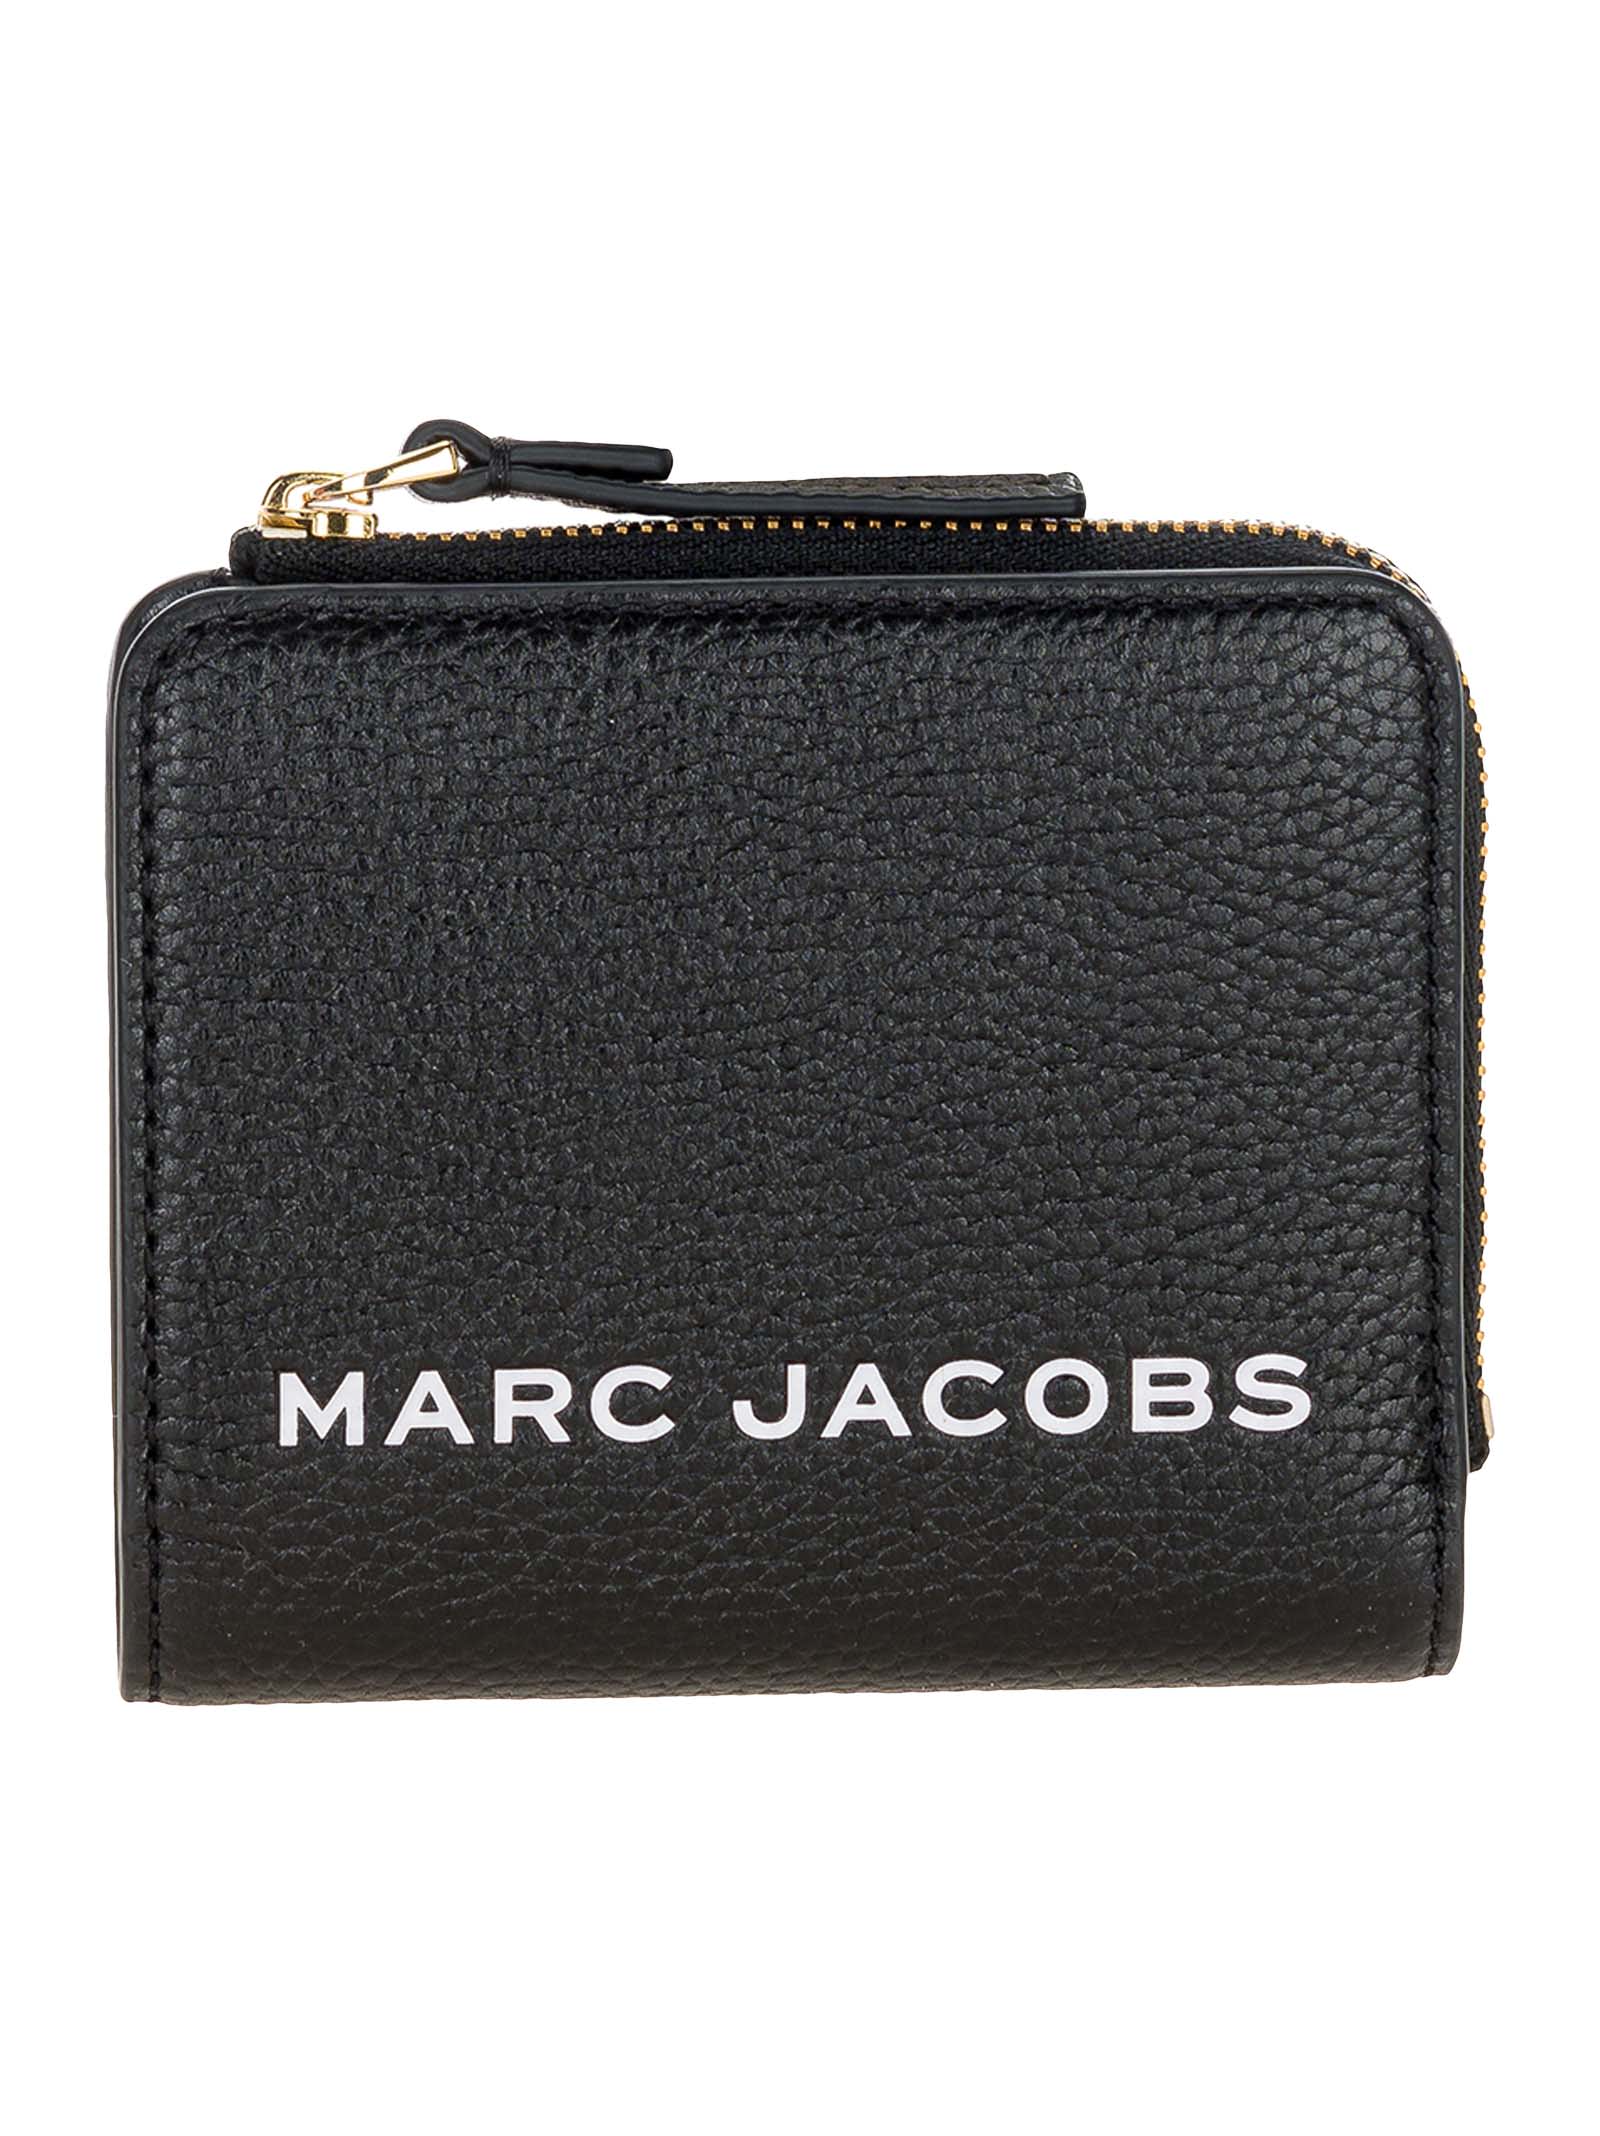 Marc Jacobs The Bold Mini Compact Zip Wallet